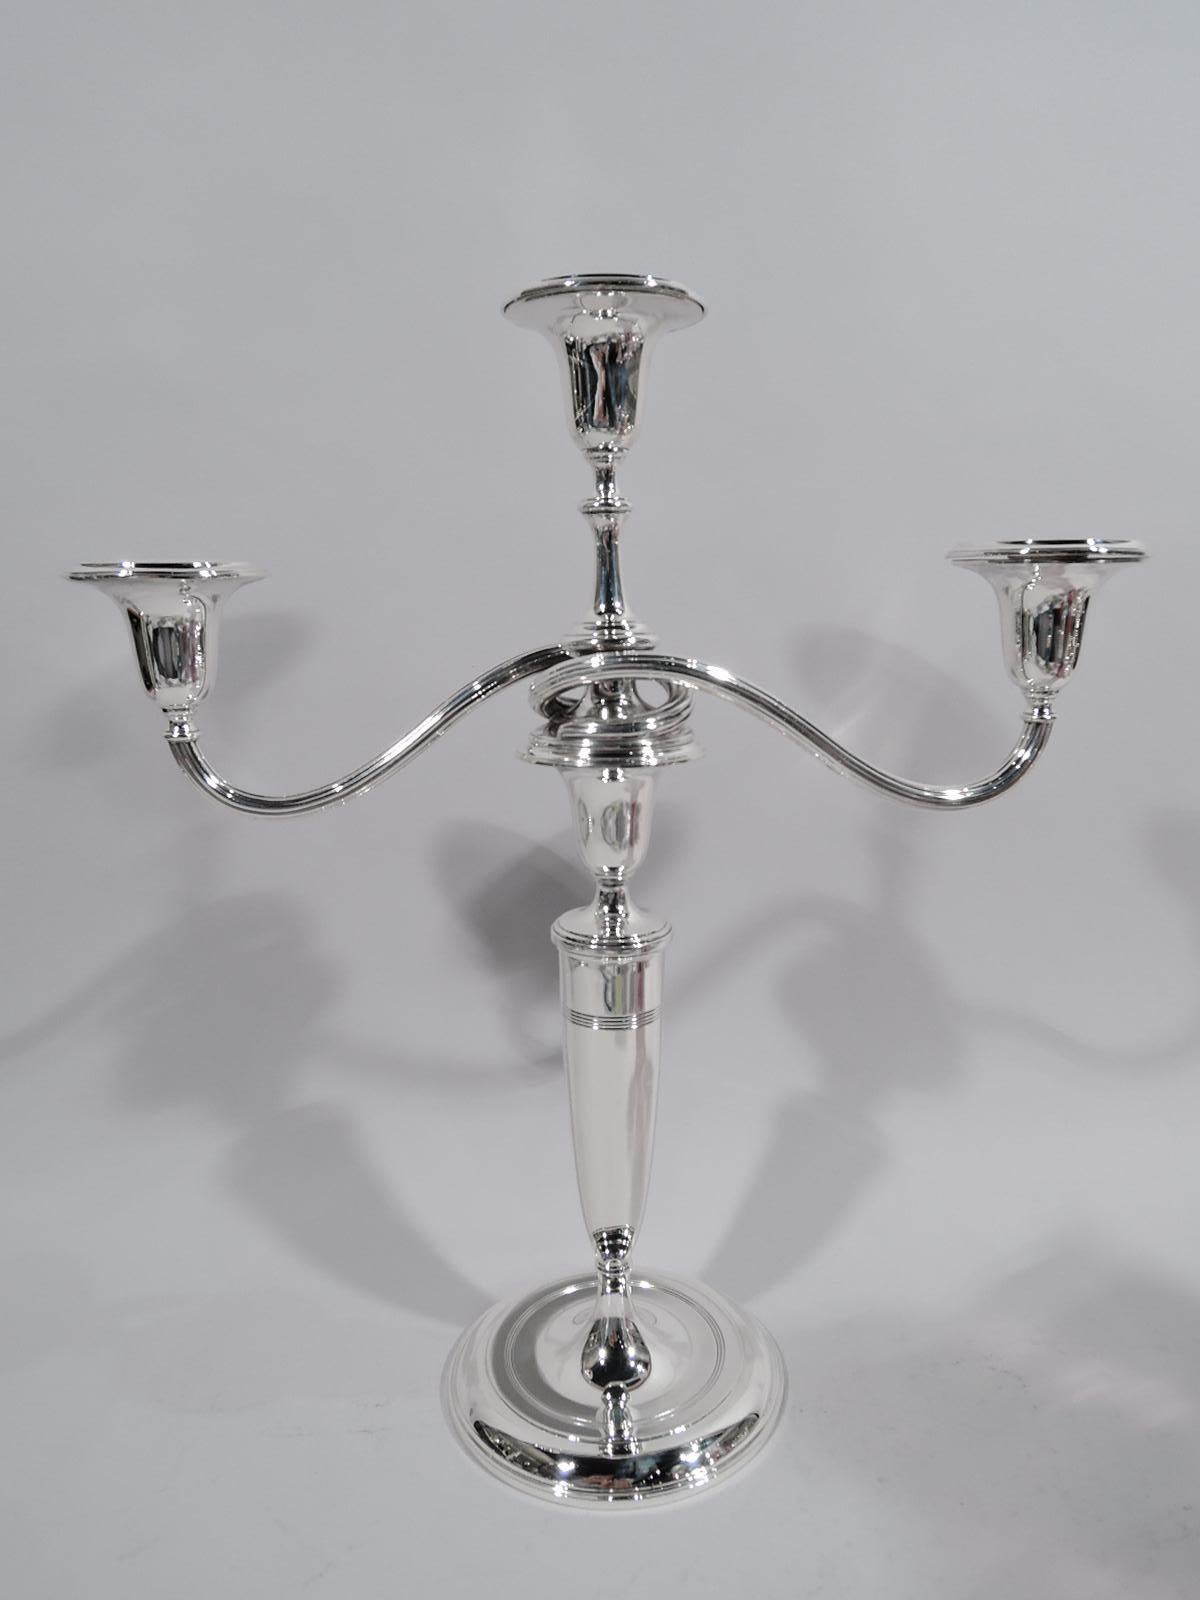 Pair of Modern classical elegant sterling silver 3-light candelabra. Made by Tiffany & Co. in New York. Each: Urn socket on tapering shaft on raised foot. Central urn socket on tall spool shaft with wraparound reeded arms, each terminating in single